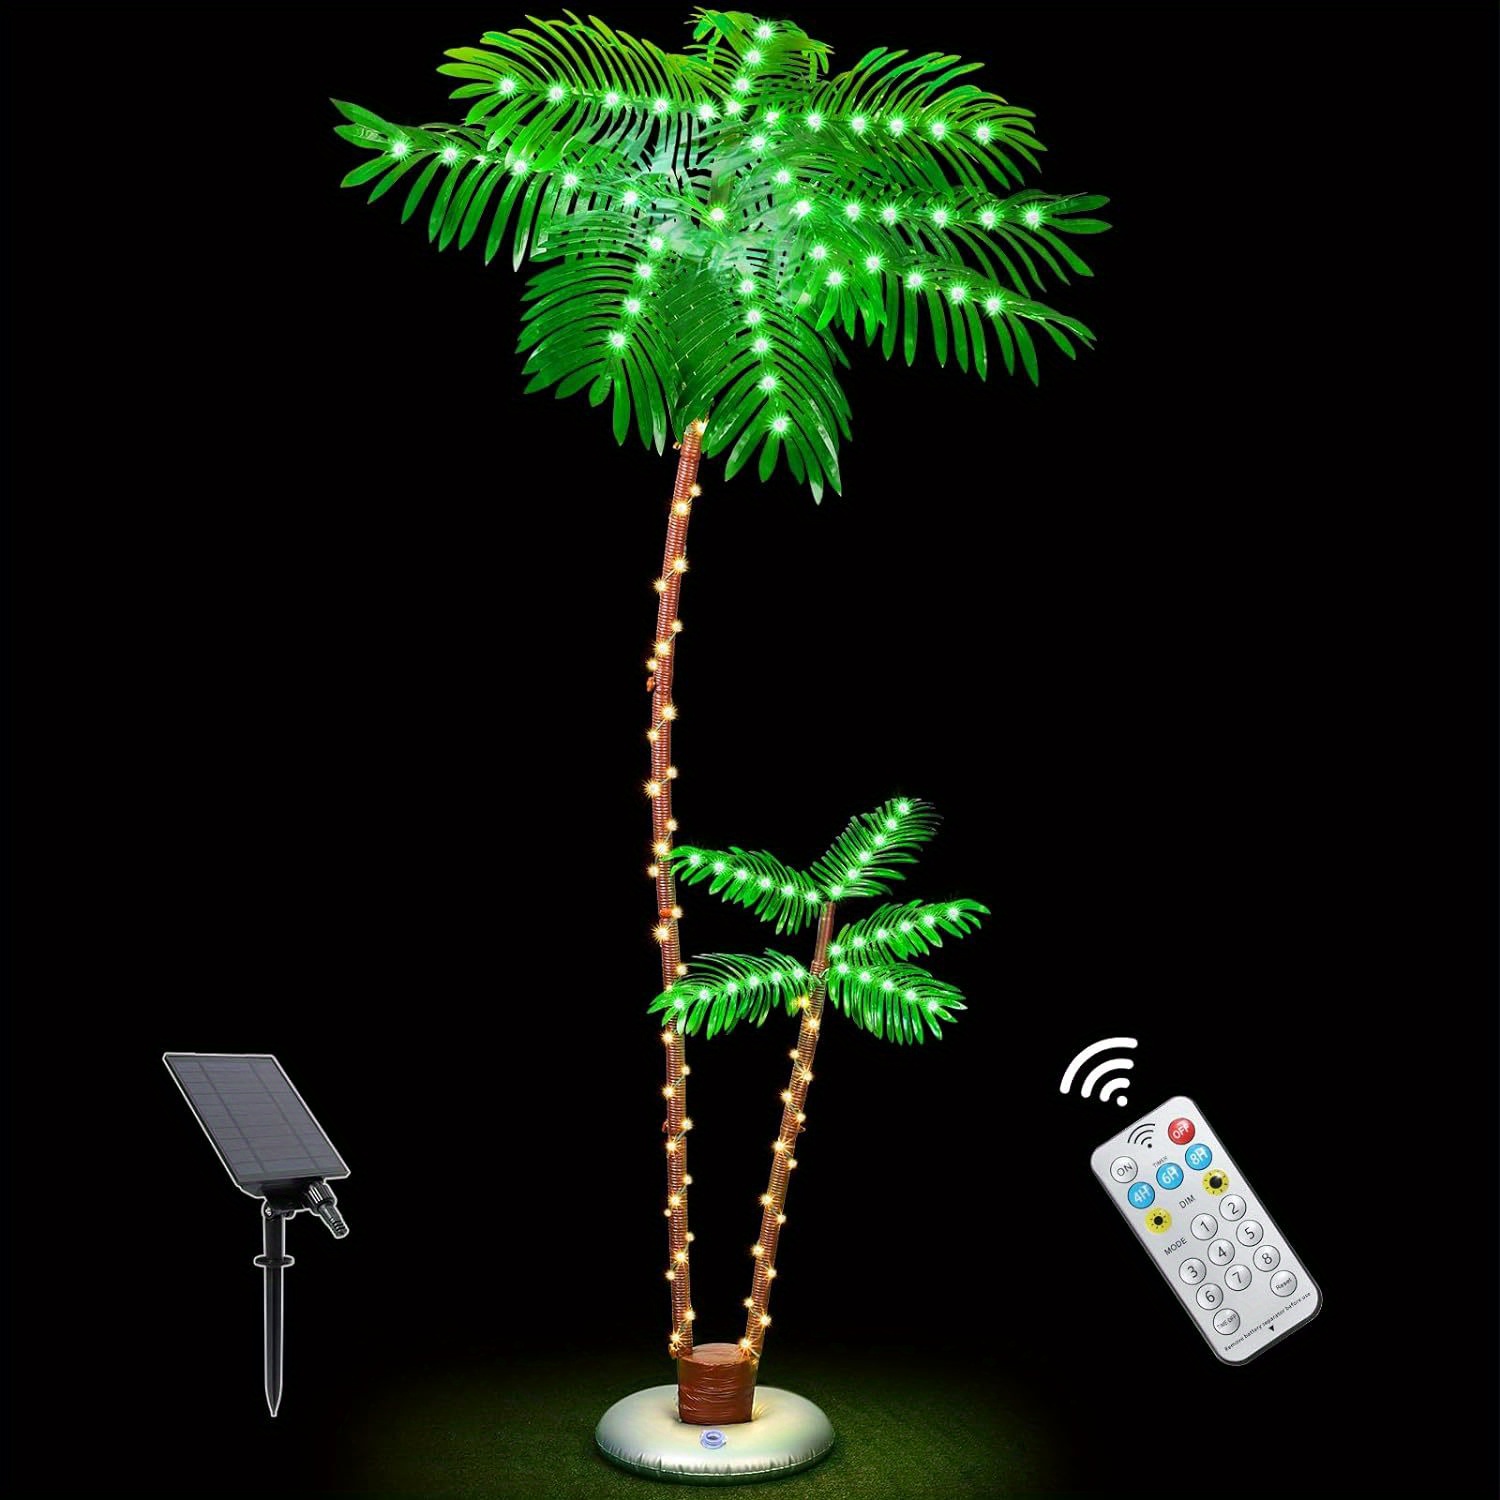 

7ft Solar Lighted Palm Trees For Outside Patio, Bar Pool Deck Outdoor Decorations Decor, Light Up Led Artificial Fake Tree Lights With 2 Trunks For Yard Tropical Party Christmas